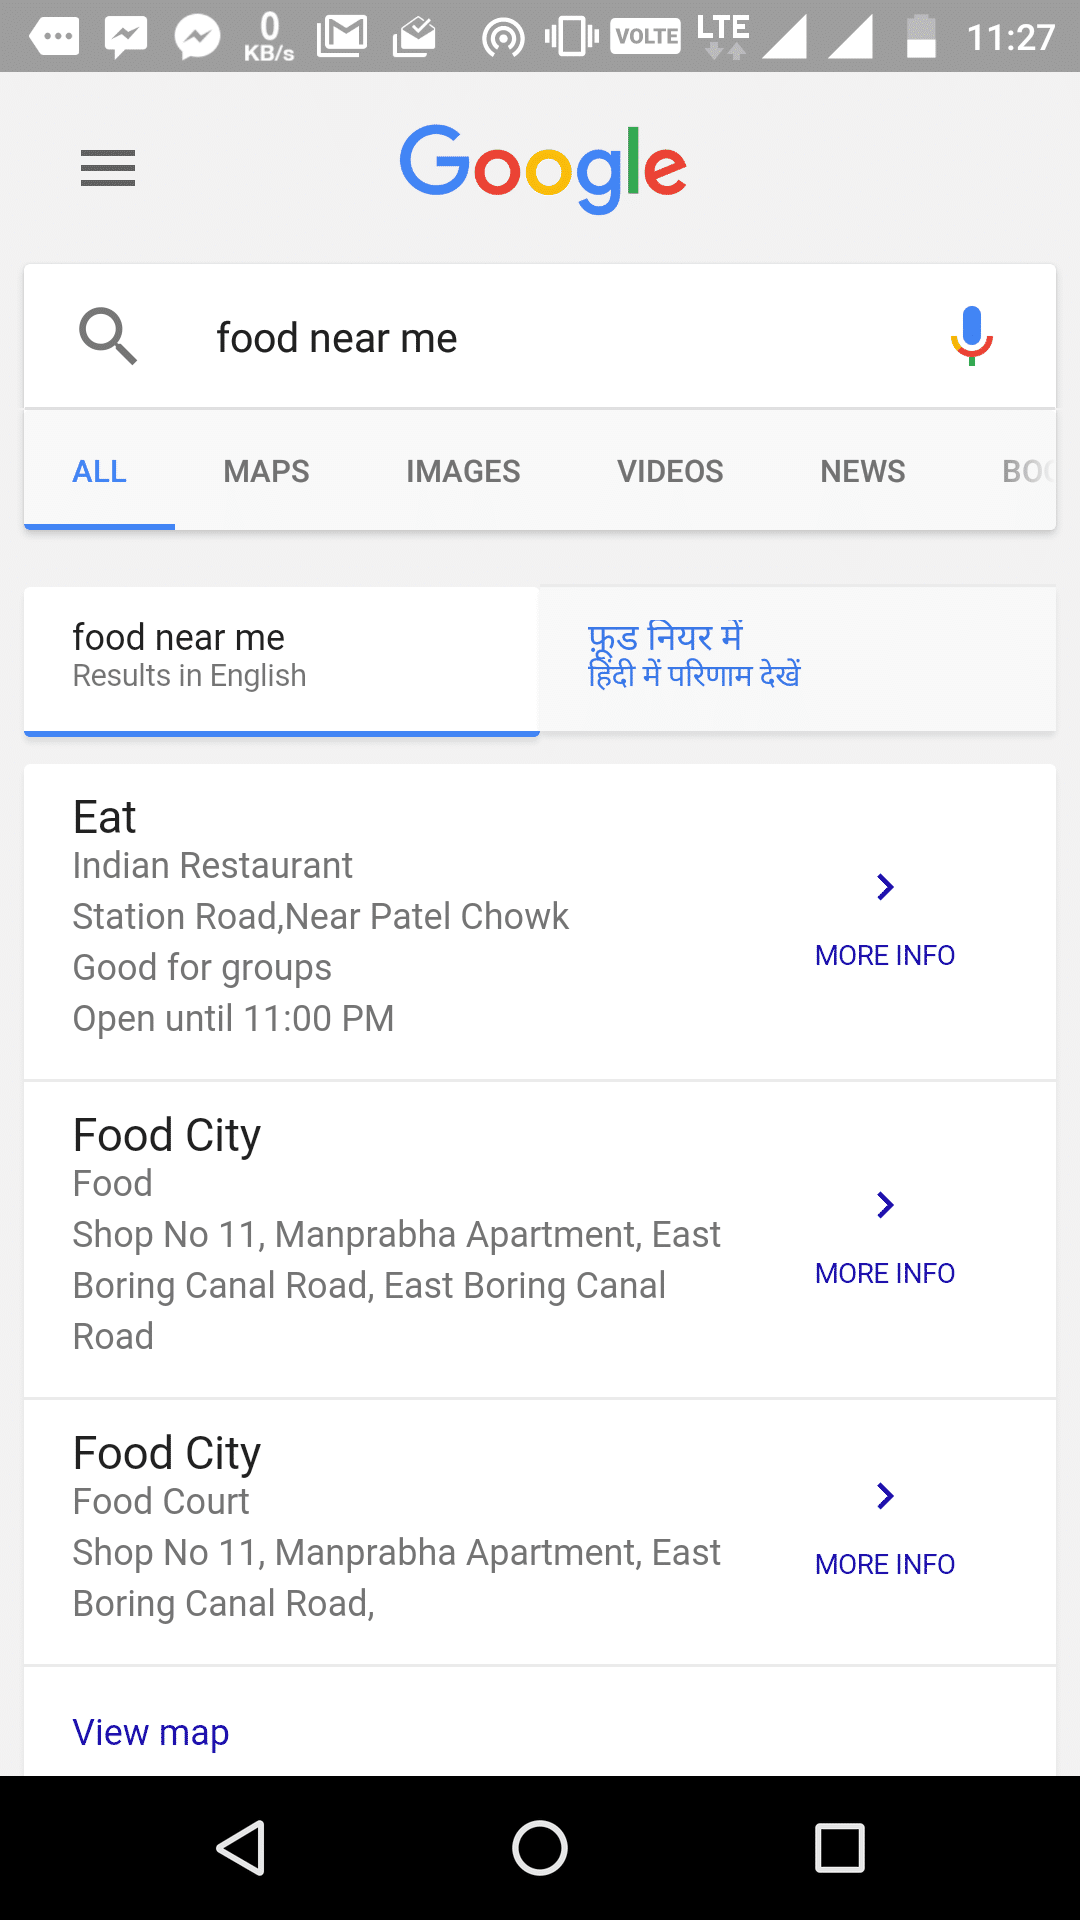 Google Search - Food Near Me - Find Restaurants for Chinese, Mexican, Thai, Fast Food Delivery Near Me